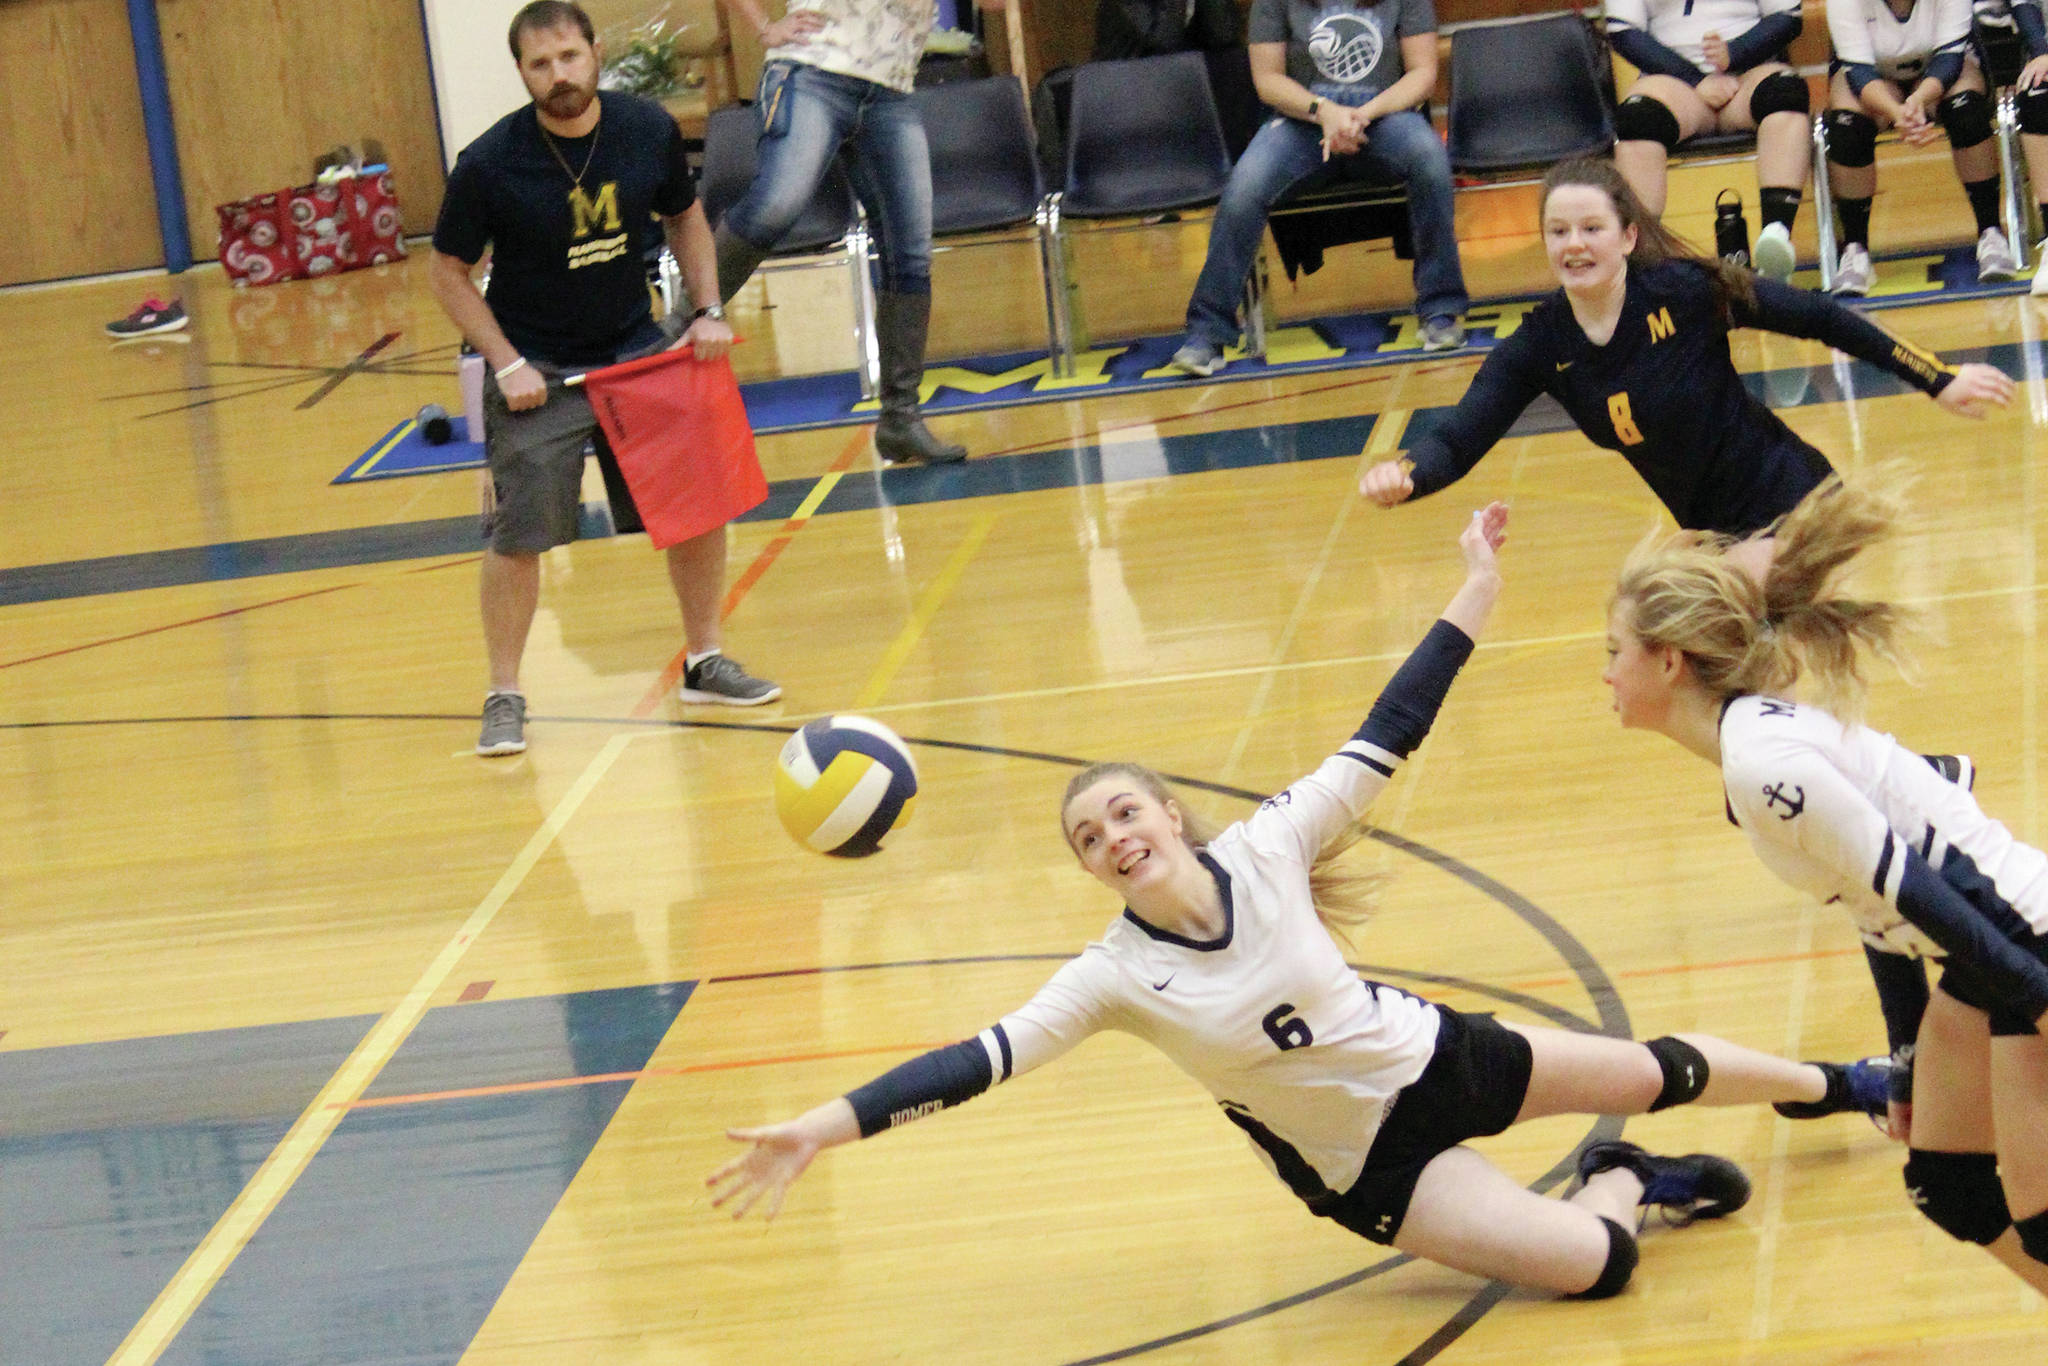 Homer’s Karmyn Gallios dives for the ball during a Tuesday, Oct. 29, 2019 volleyball game against Kenai Central High School in the Alice Witte Gymnasium in Homer, Alaska. (Photo by Megan Pacer/Homer News)